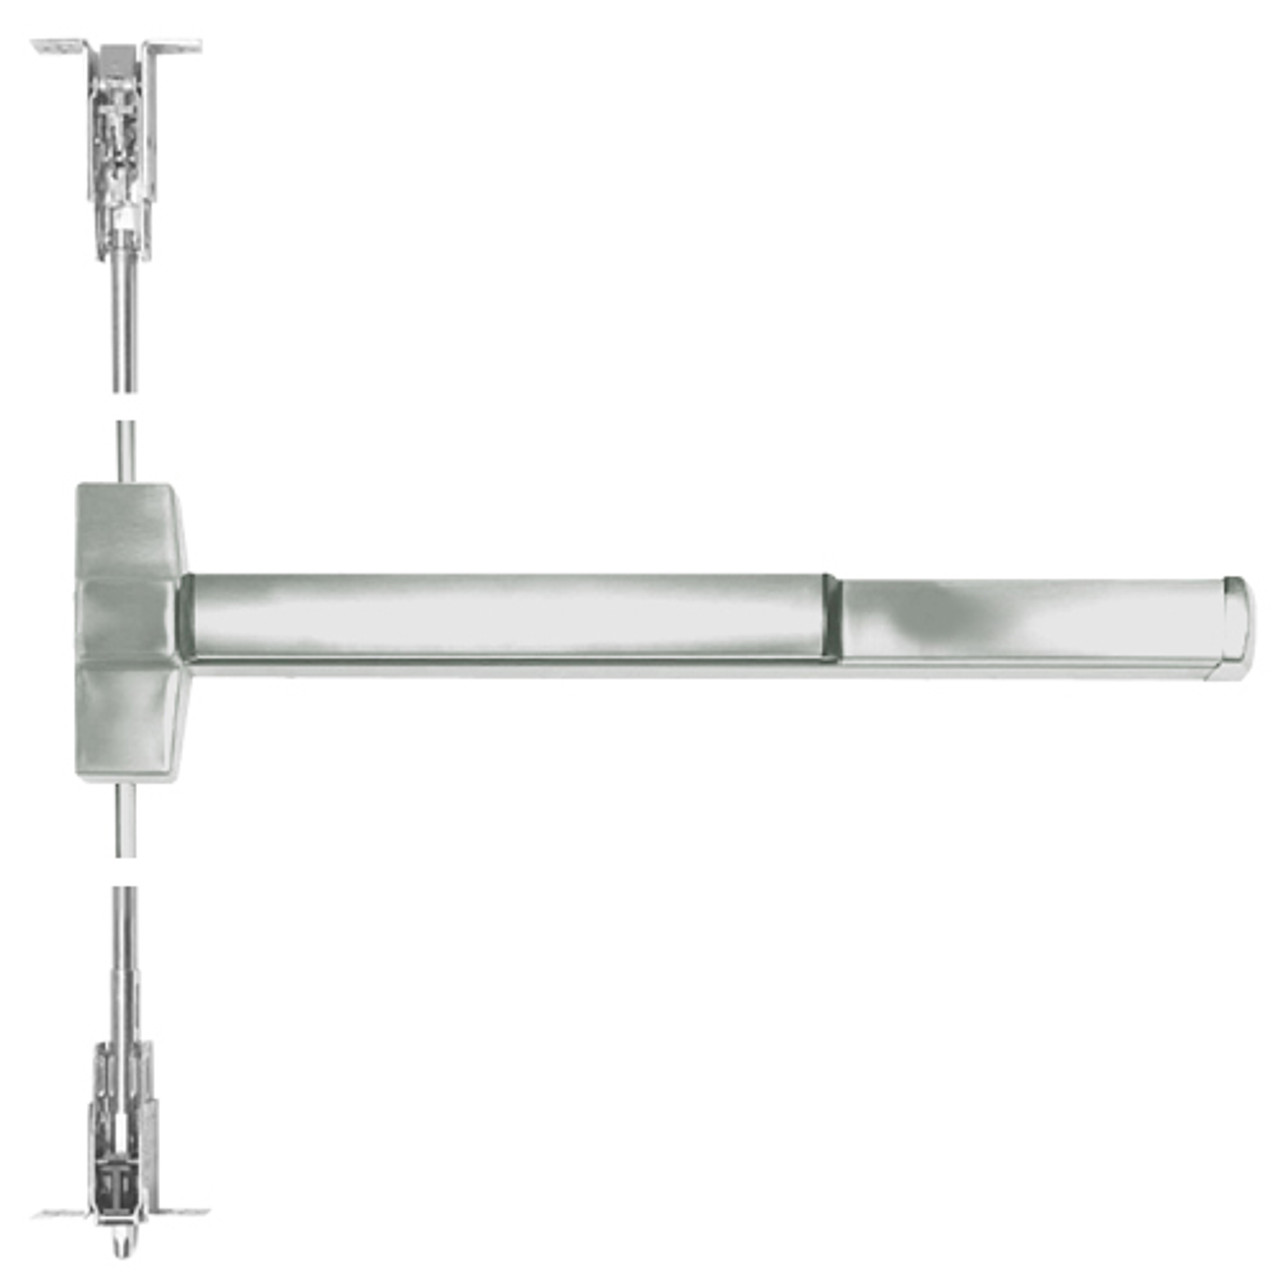 ED5800A-619-MELR Corbin ED5800 Series Fire Rated Concealed Vertical Rod Device with Motor Latch Retraction in Satin Nickel Finish